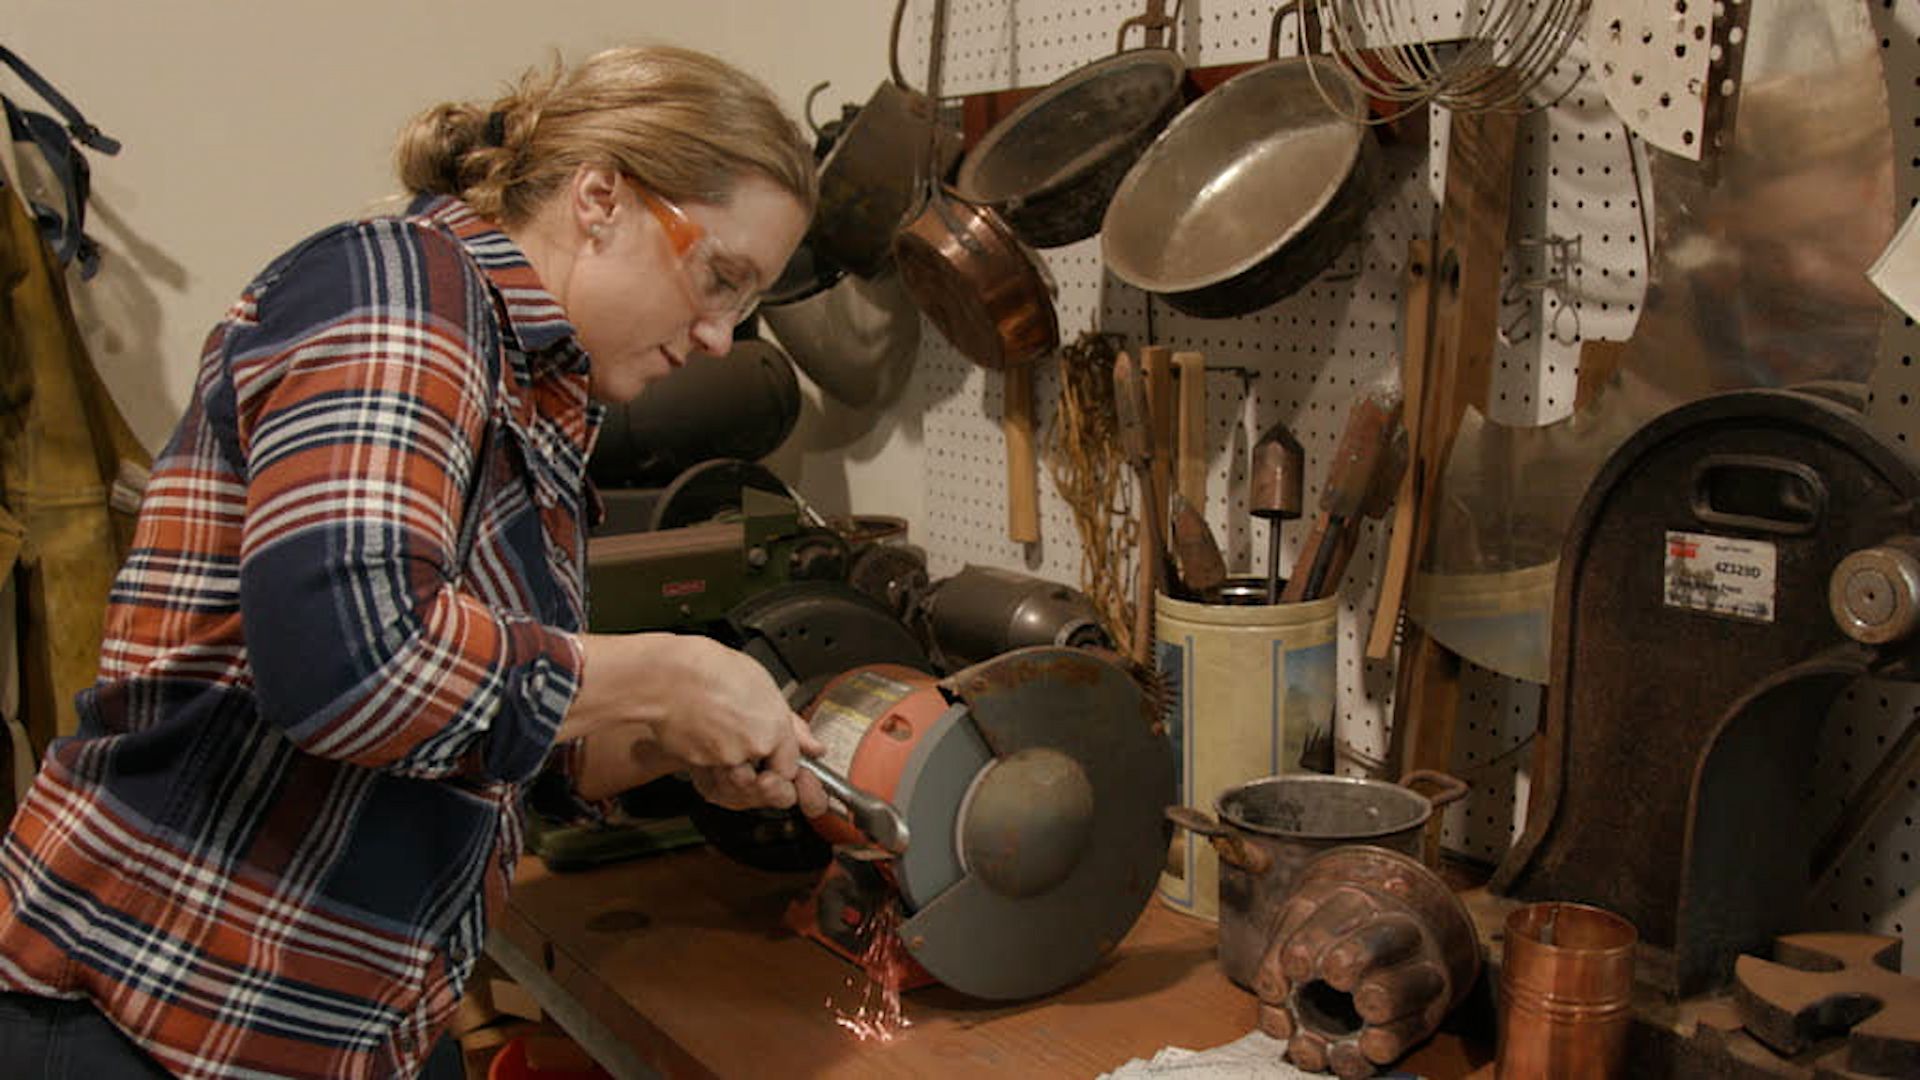 Copper State Forge Unique Hand Forged Cookware.